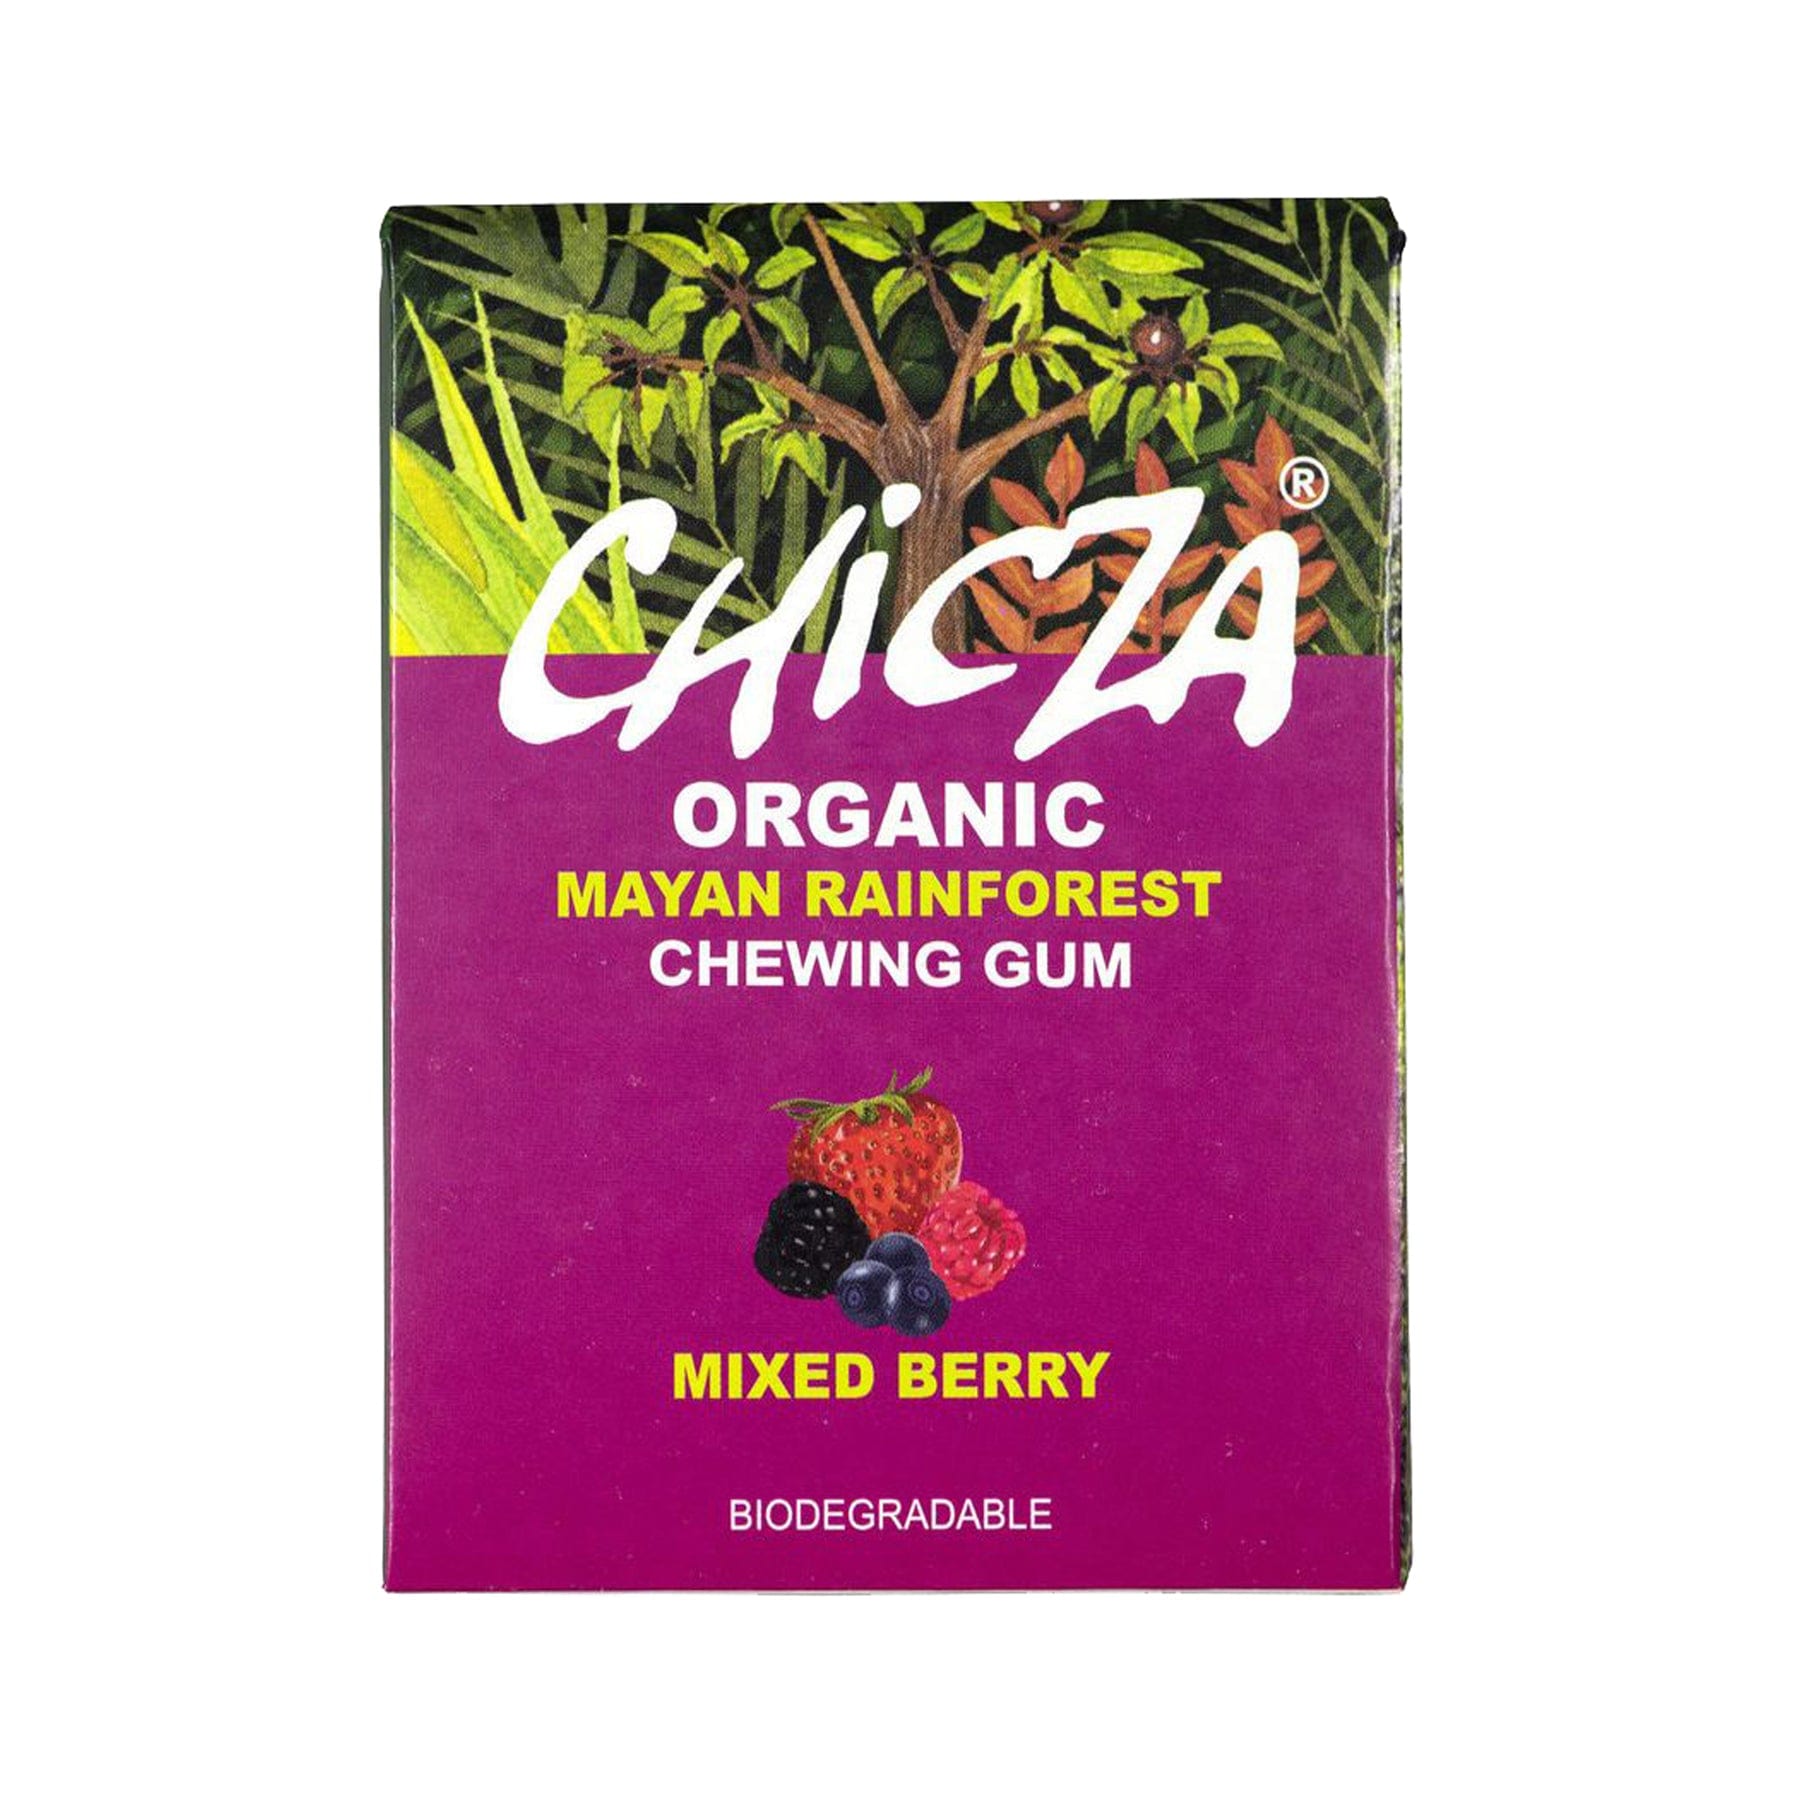 CHICZA Organic Mayan Rainforest Chewing Gum packaging, Mixed Berry flavor, biodegradable product, with images of green leaves, berries, and tree on the label.